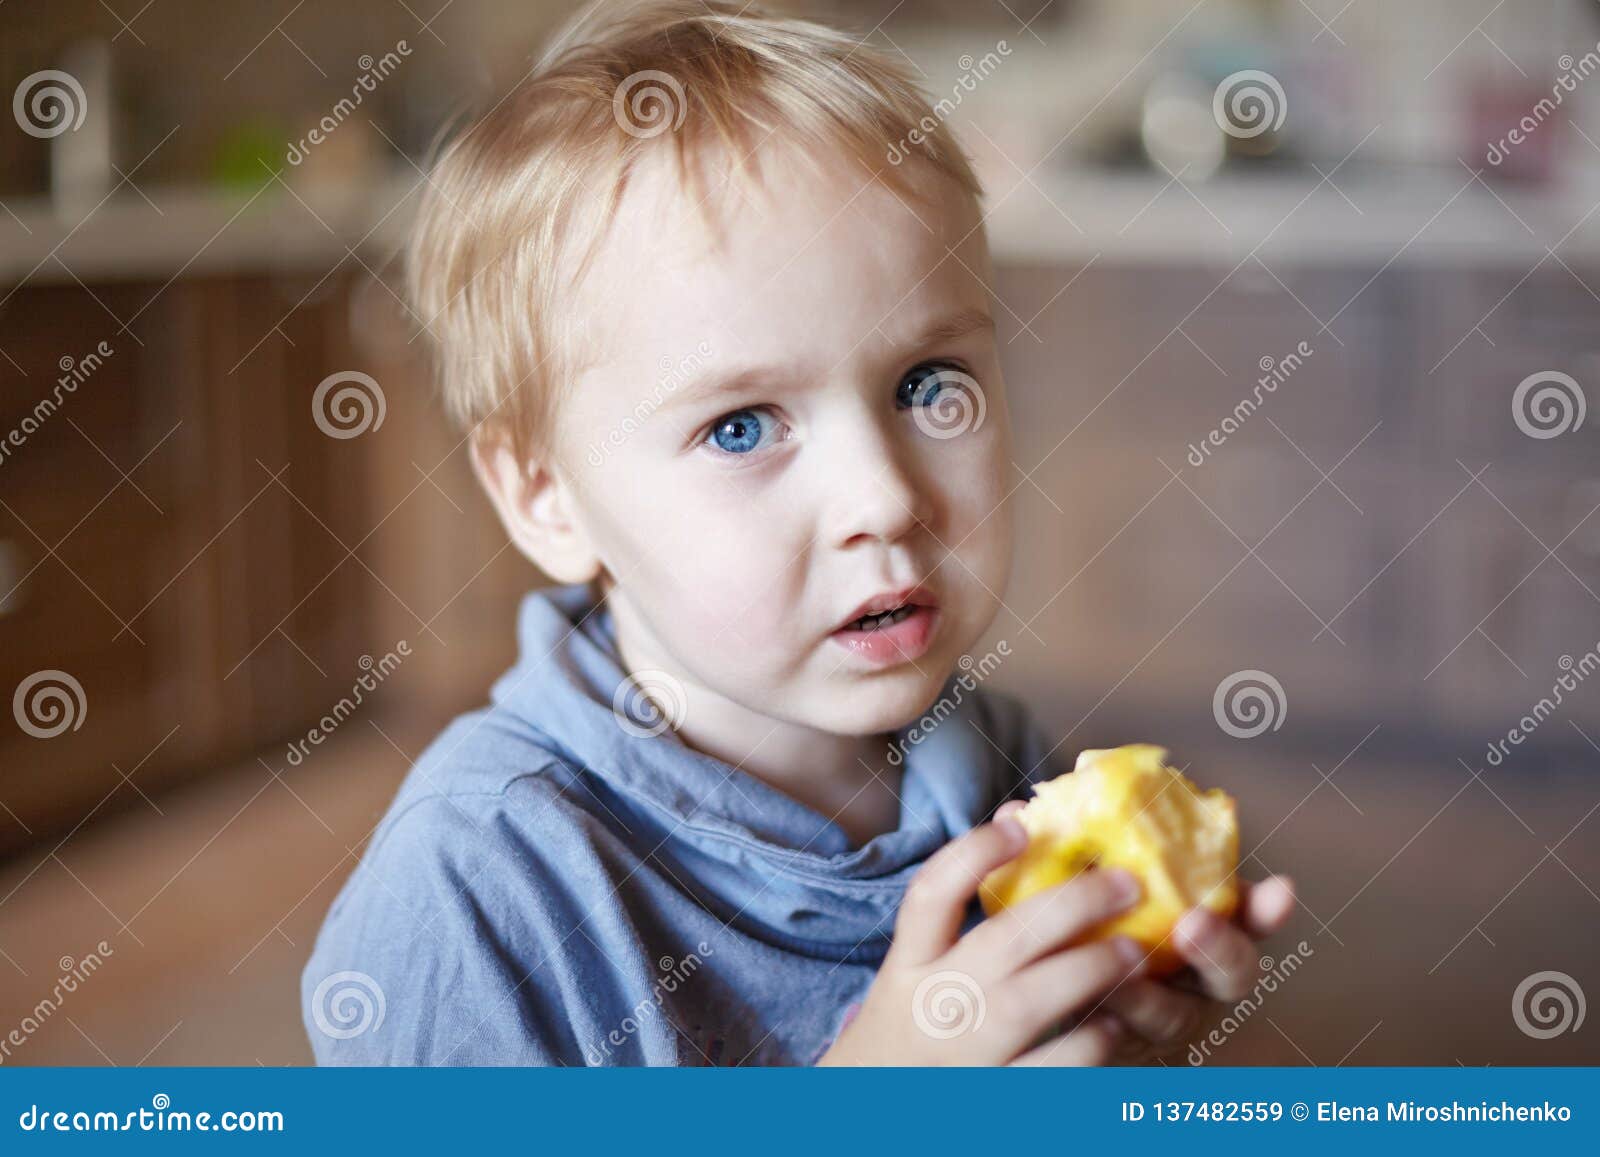 Cute Caucasian Little Boy With Blue Eyes And Blonde Hair Eats